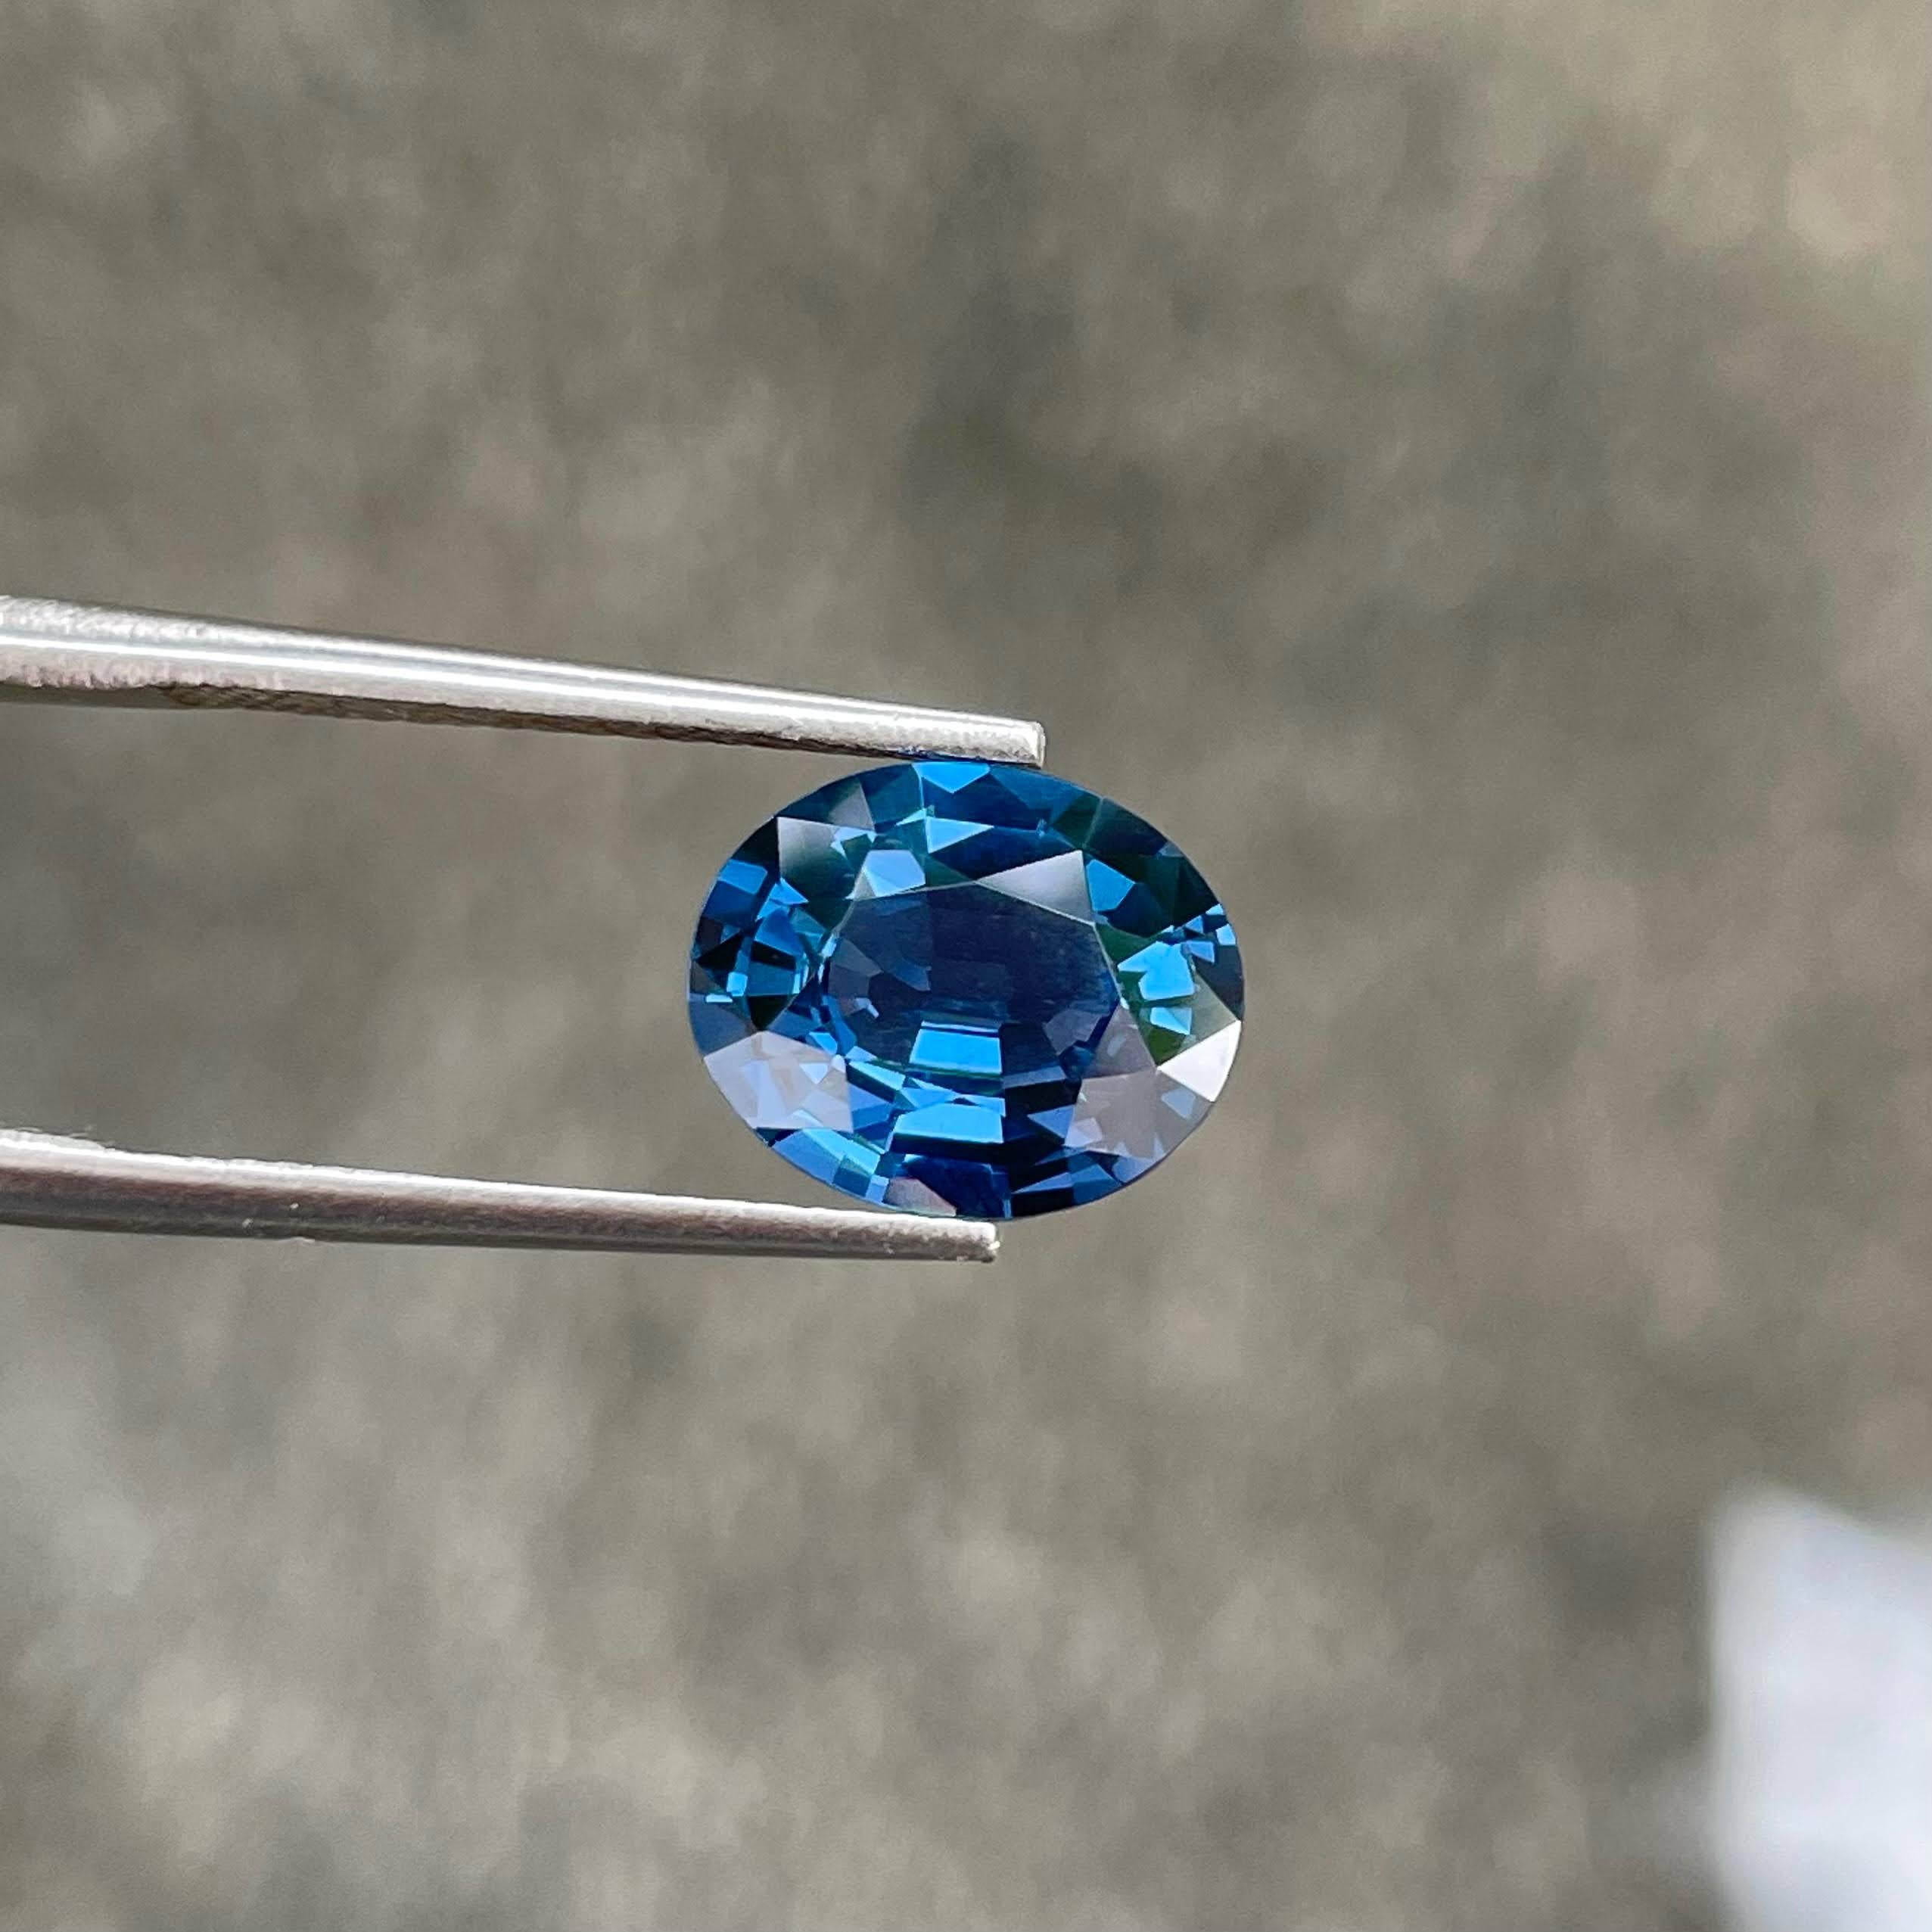 Weight 3.69 carats 
Dimensions 10.85x9.00x4.94 mm
Treatment none 
Shape Oval
Cut Oval Mixed
Origin Tanzania
Clarity loupe clean





In a harmonious fusion of nature's artistry, a resplendent 3.69-carat Cobalt Blue Spinel takes center stage,